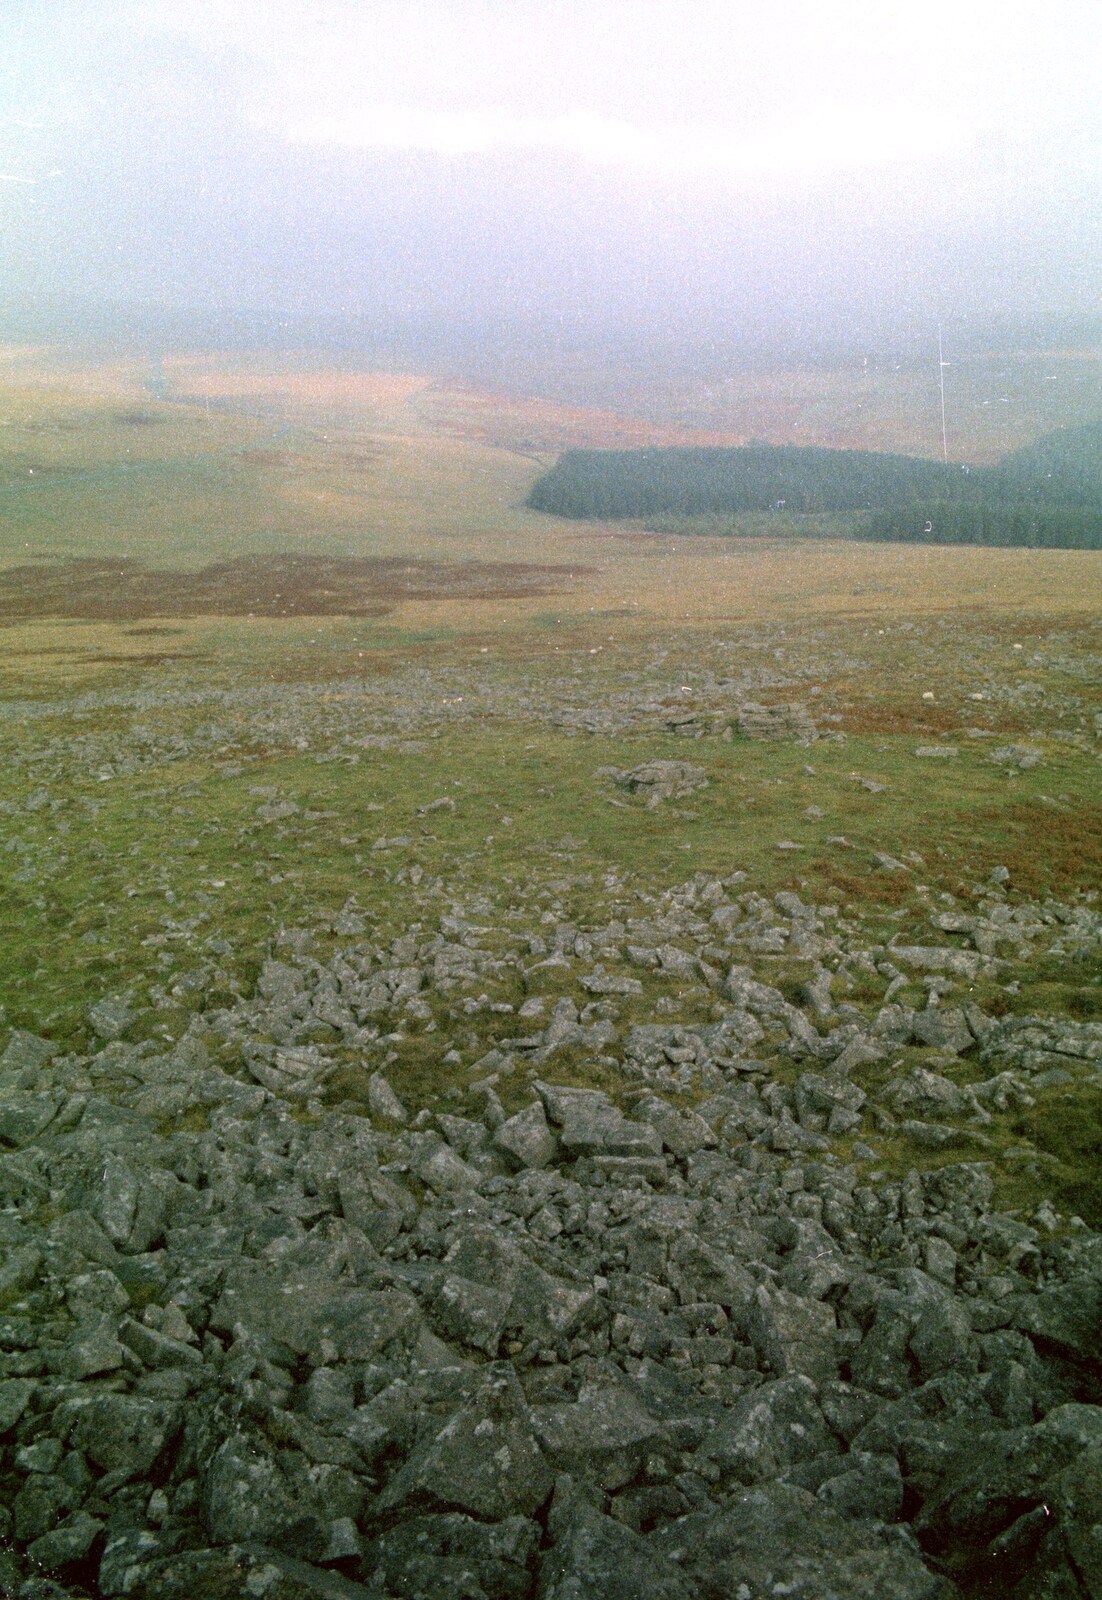 A view of Dartmoor from A Trip to Trotsky's Mount, Dartmoor, Devon - 20th March 1987